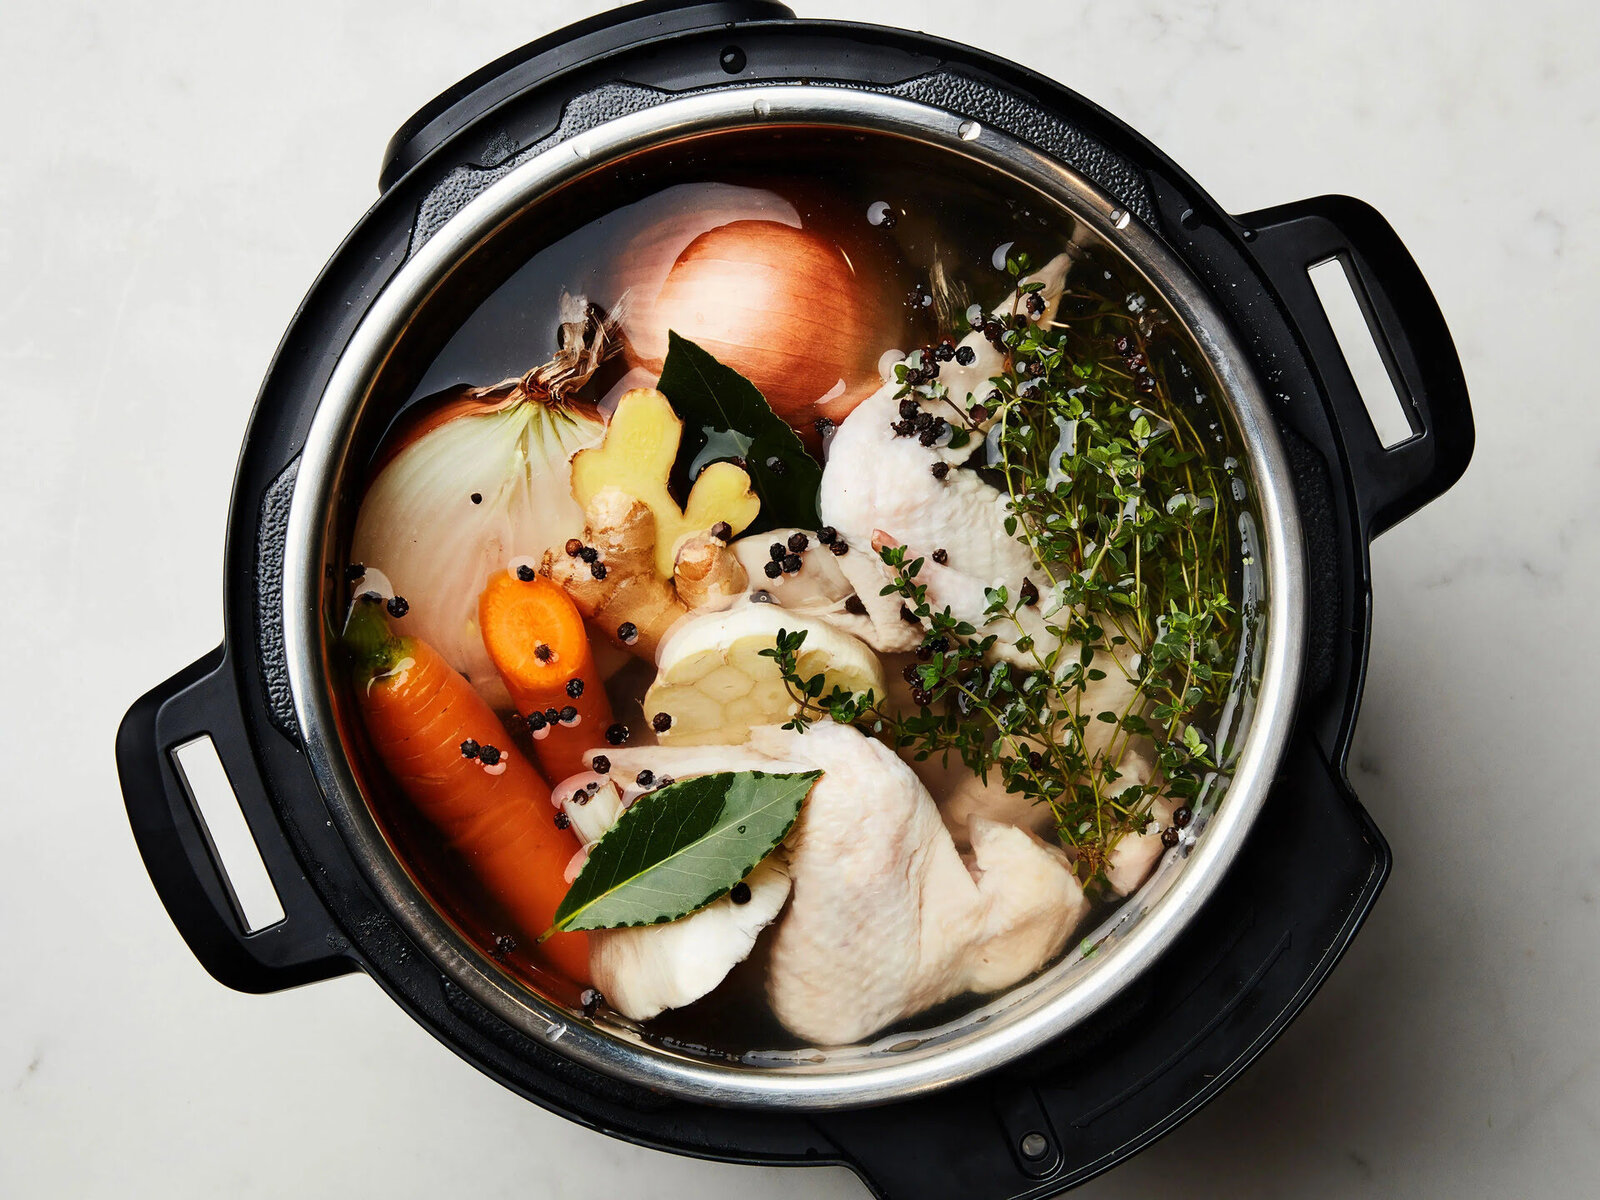 How To Make Chicken Stock In An Electric Pressure Cooker